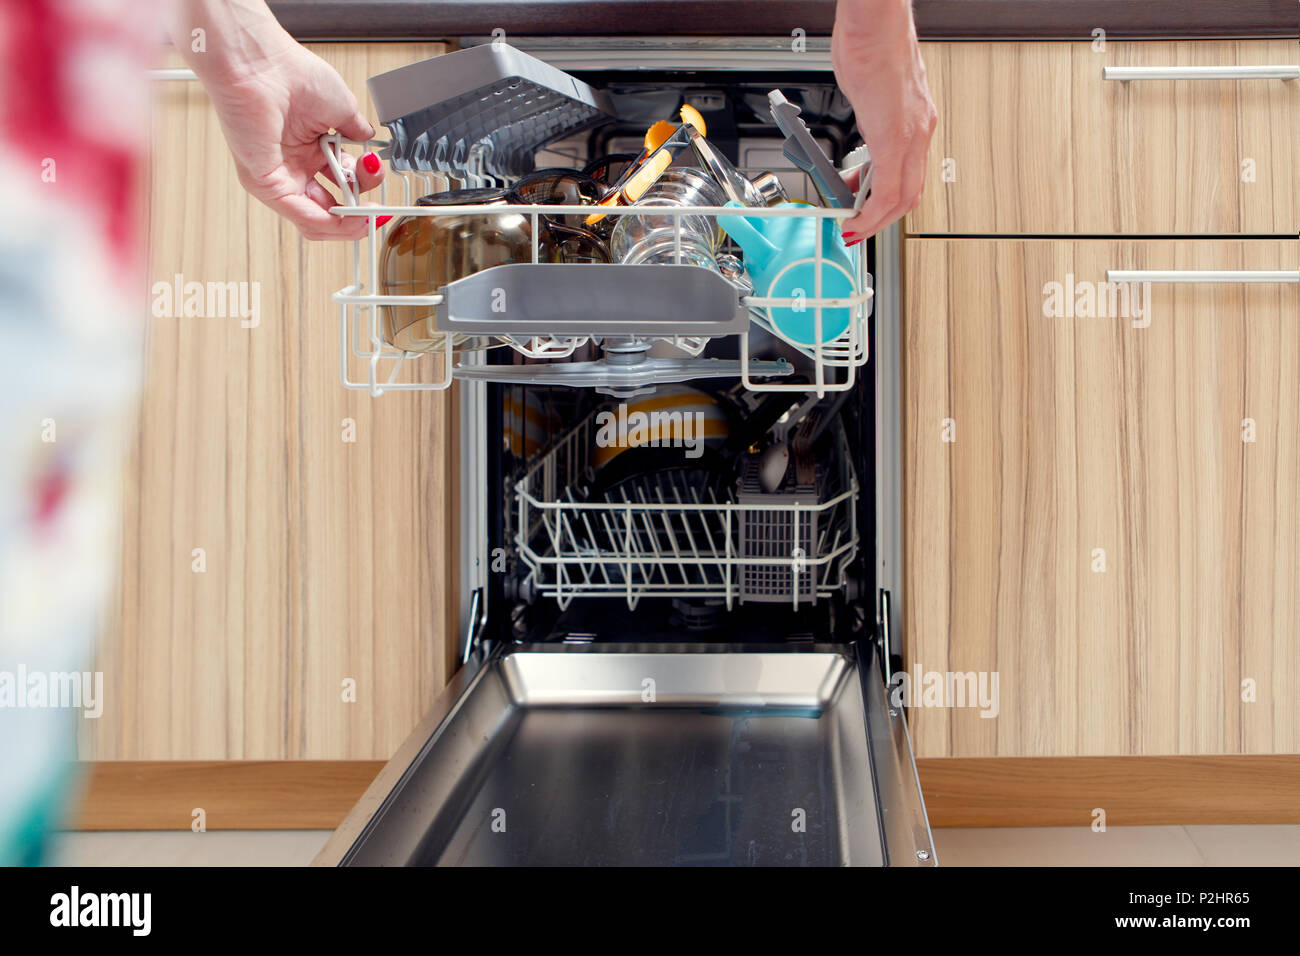 Image of girl's hand opening dishwasher with dirty dishes Stock Photo